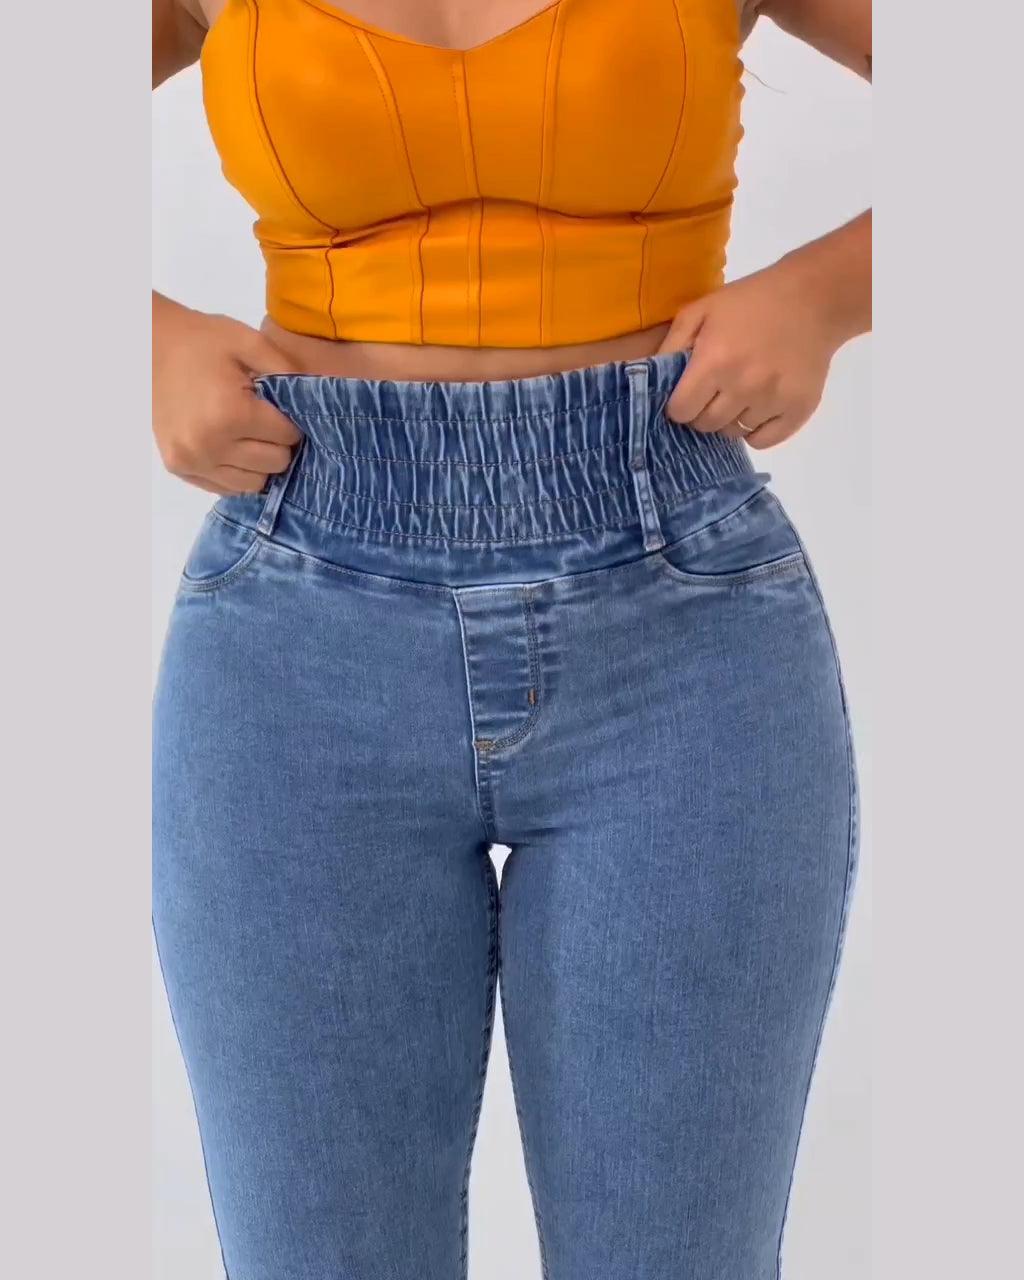 Stretchy Sliming Jeans - Wishe